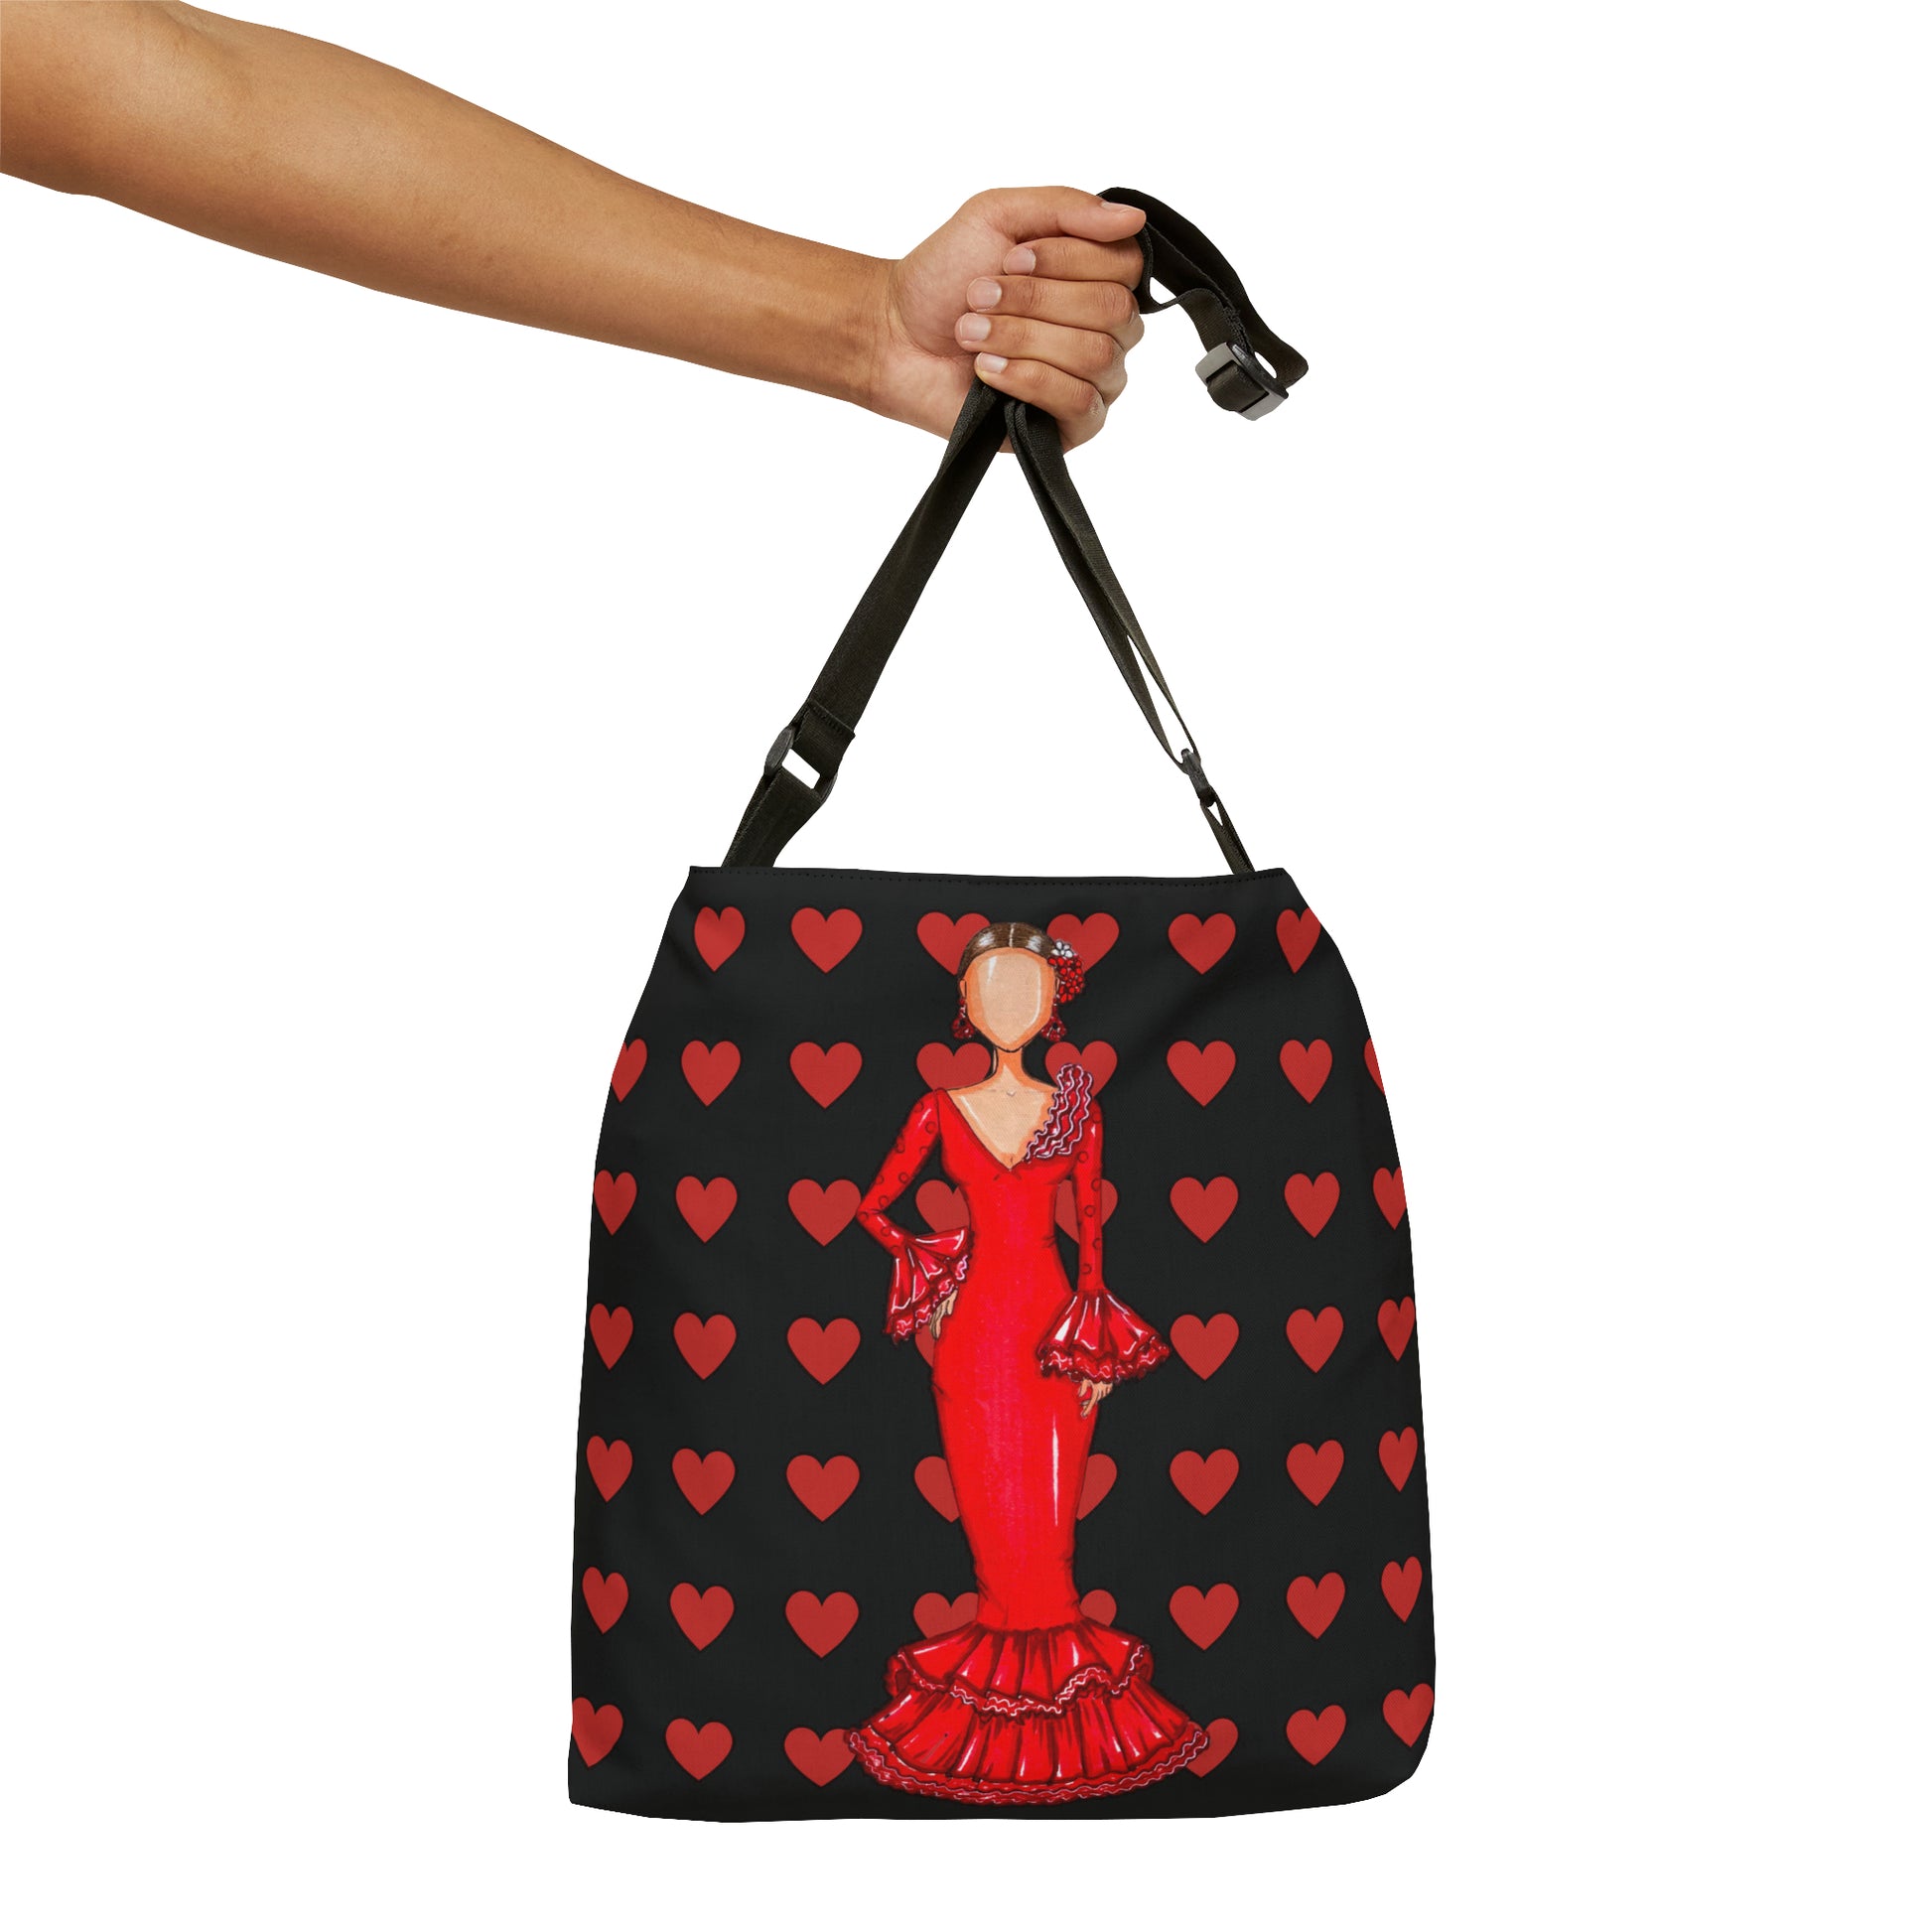 a woman's hand holding a black and red bag with hearts on it